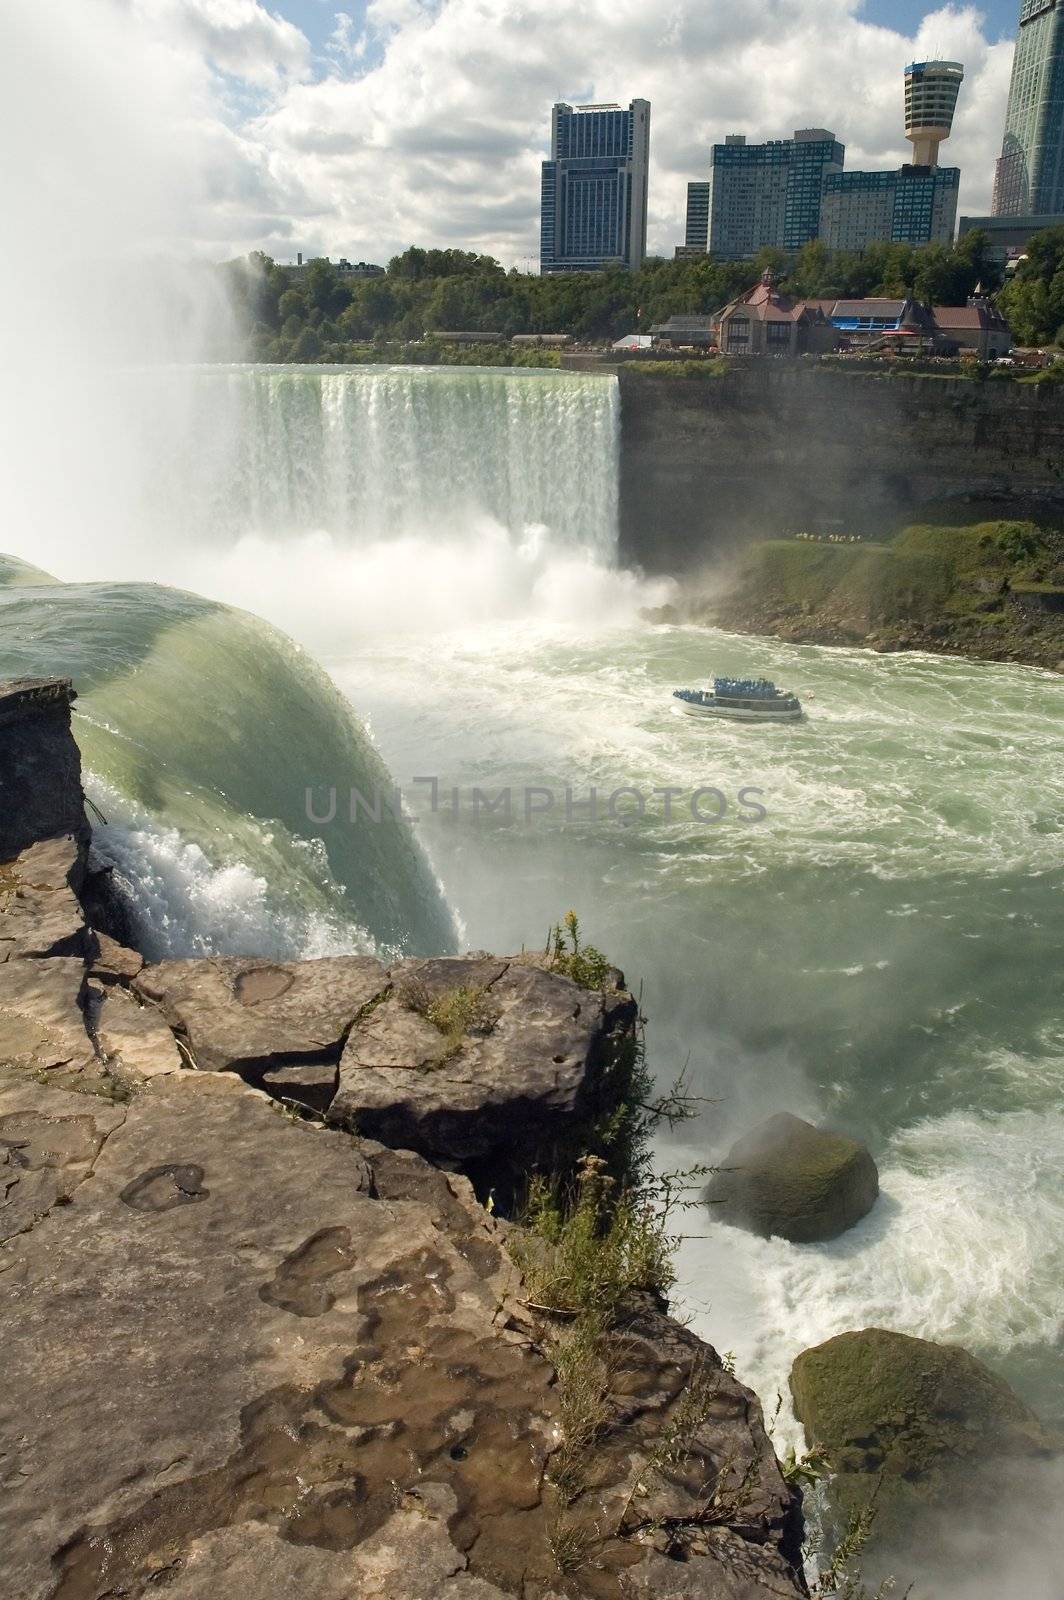 niagara falls, photo taken from united states, boat on horseshoe falls, canadian building in background